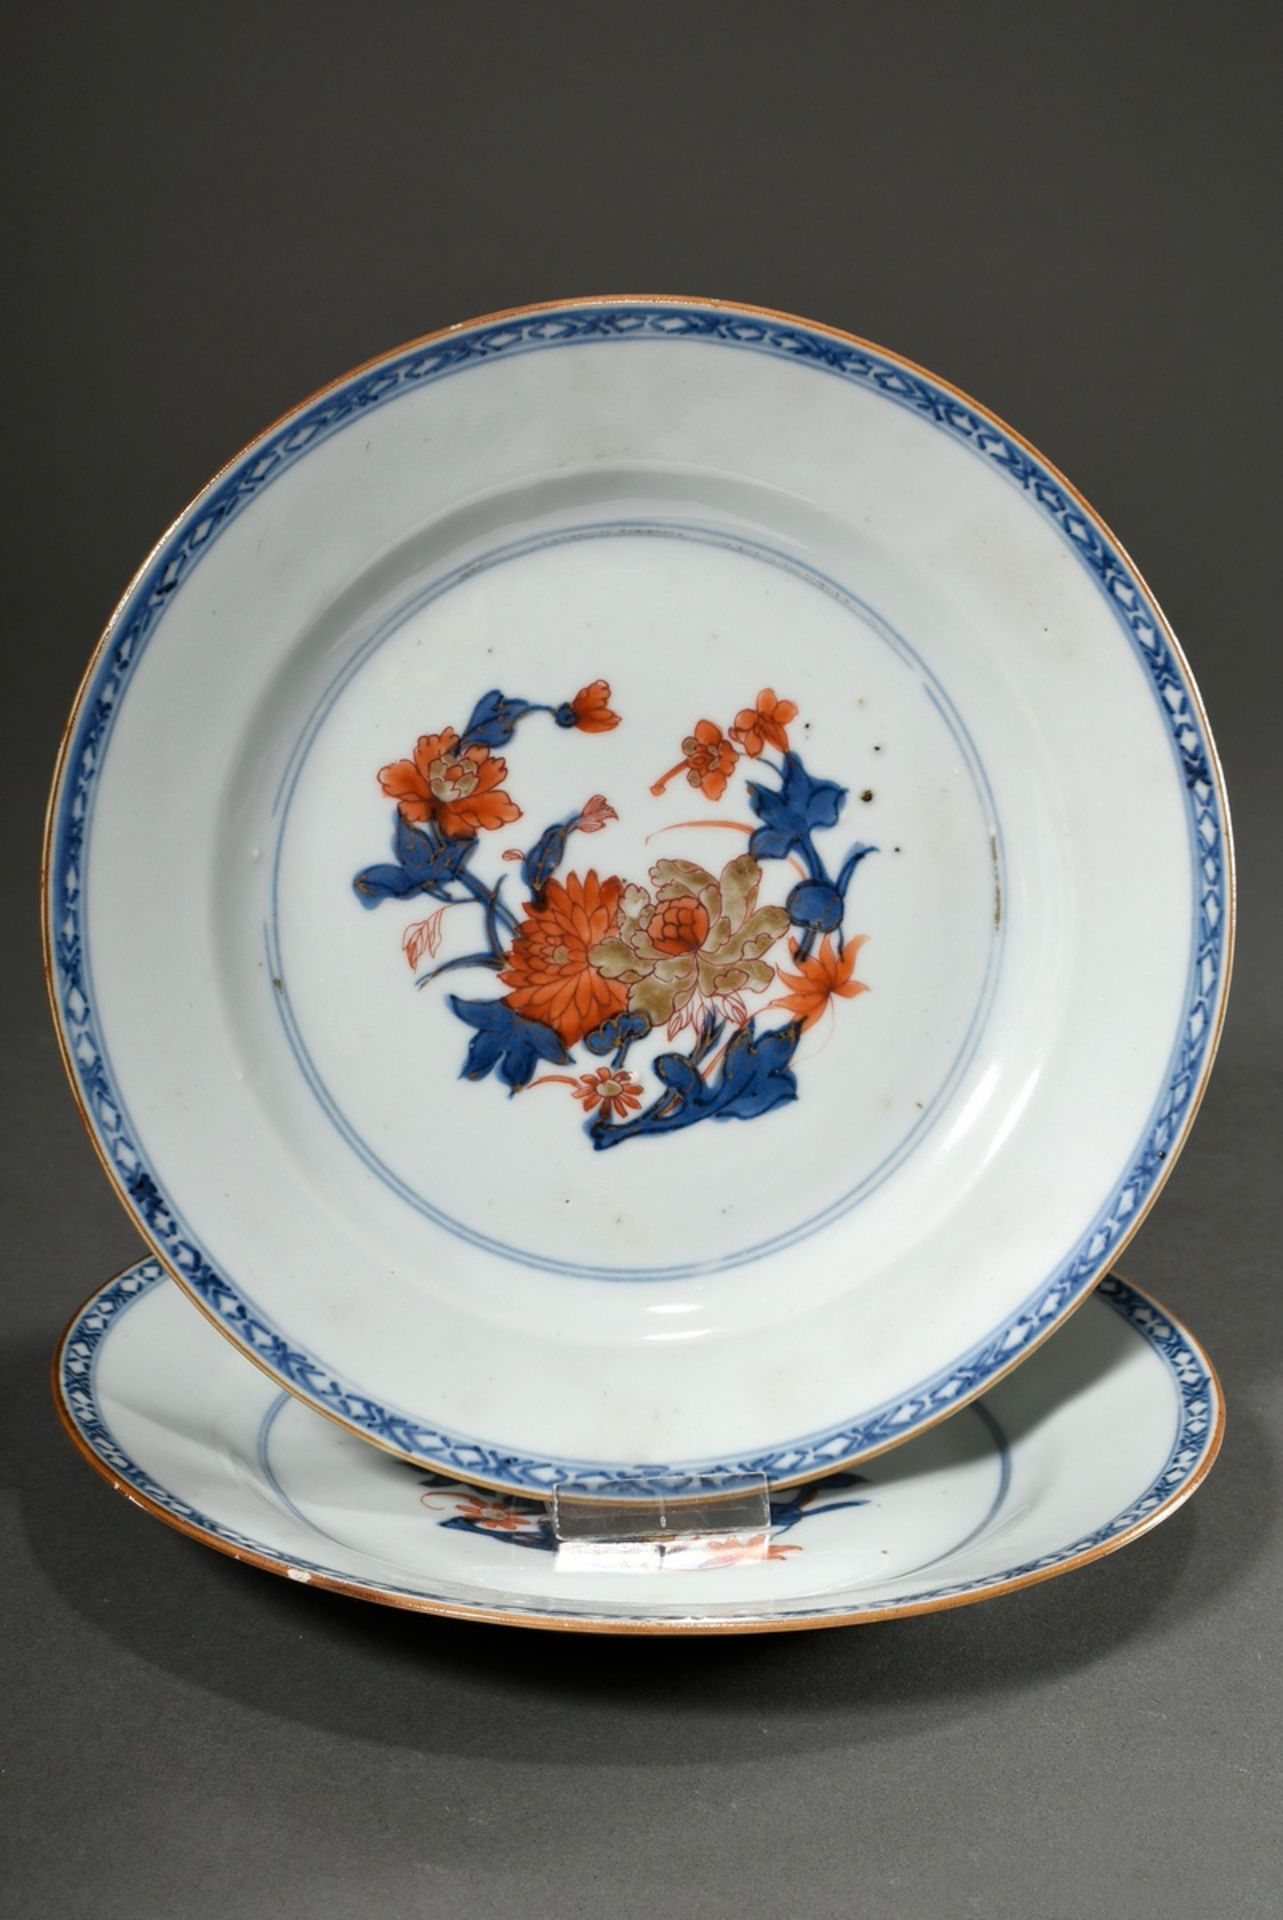 2 Chine de Commande plates with "Imari flower decoration" in blue painting, iron red and gold, Chin